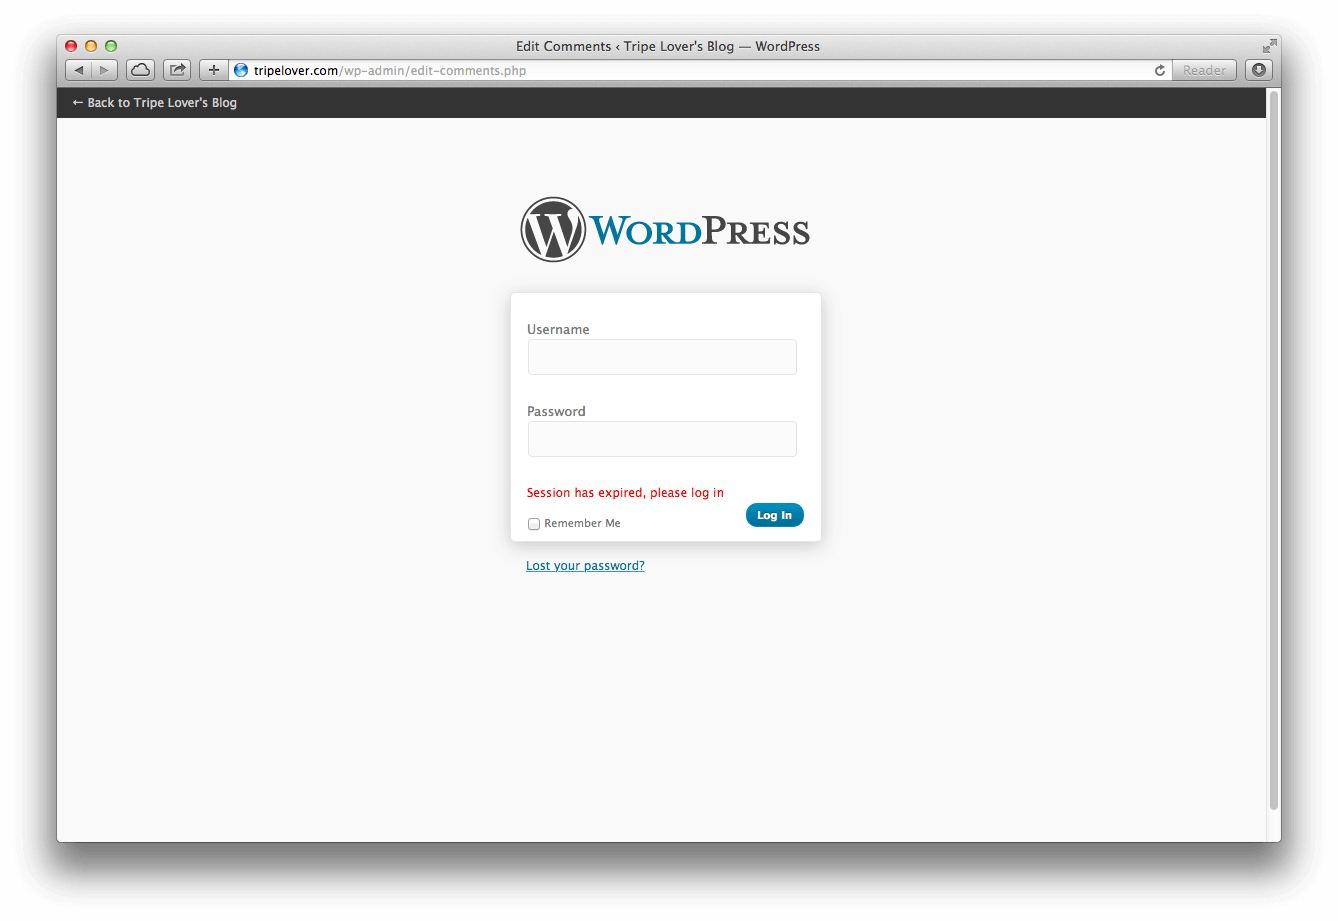 How to craft an XSS payload to create an admin user in Wordpress